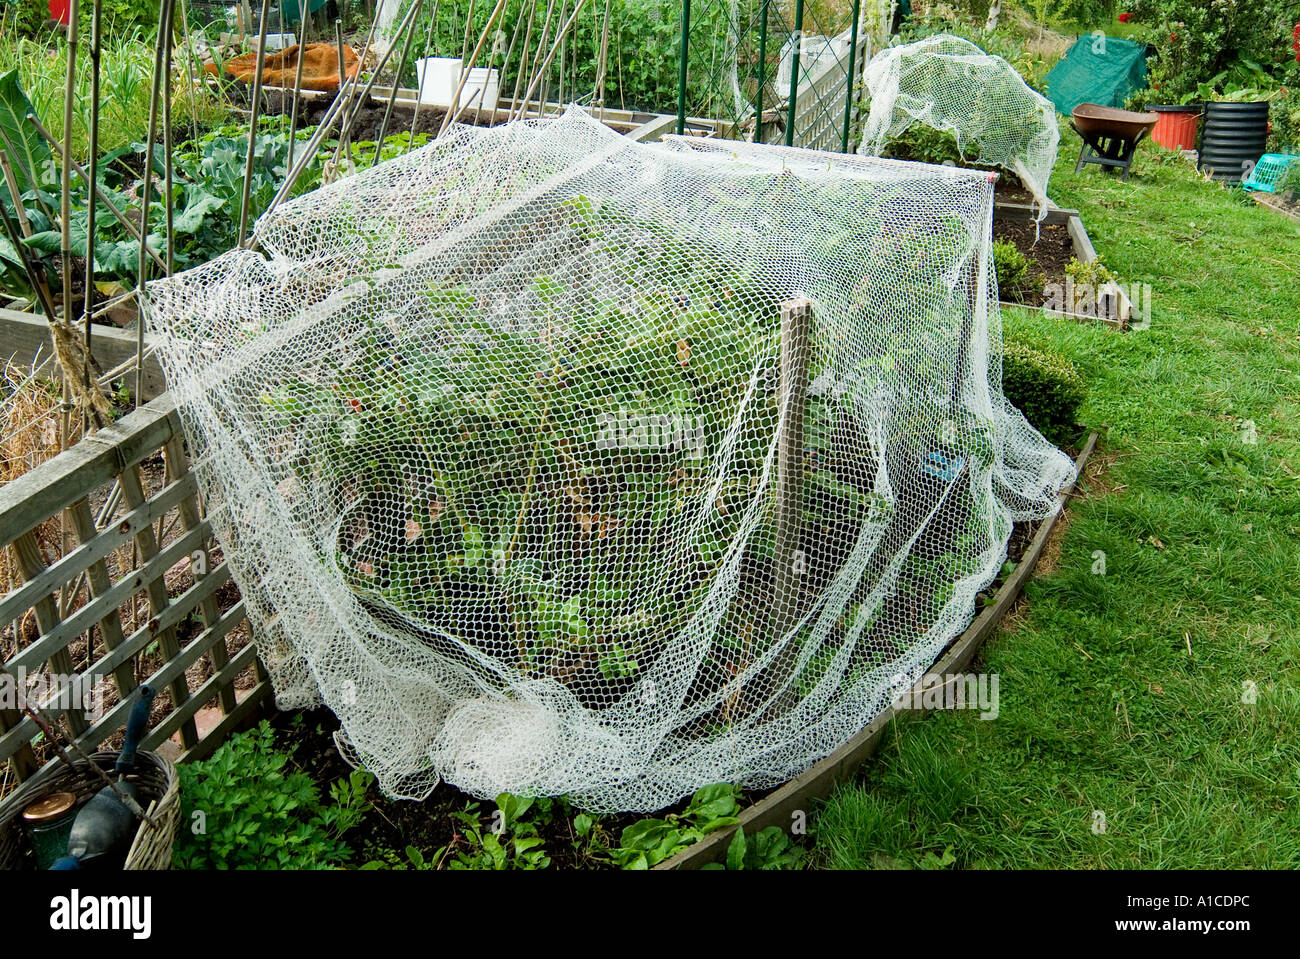 Ripening blueberries under nets to protect them from birds Stock Photo